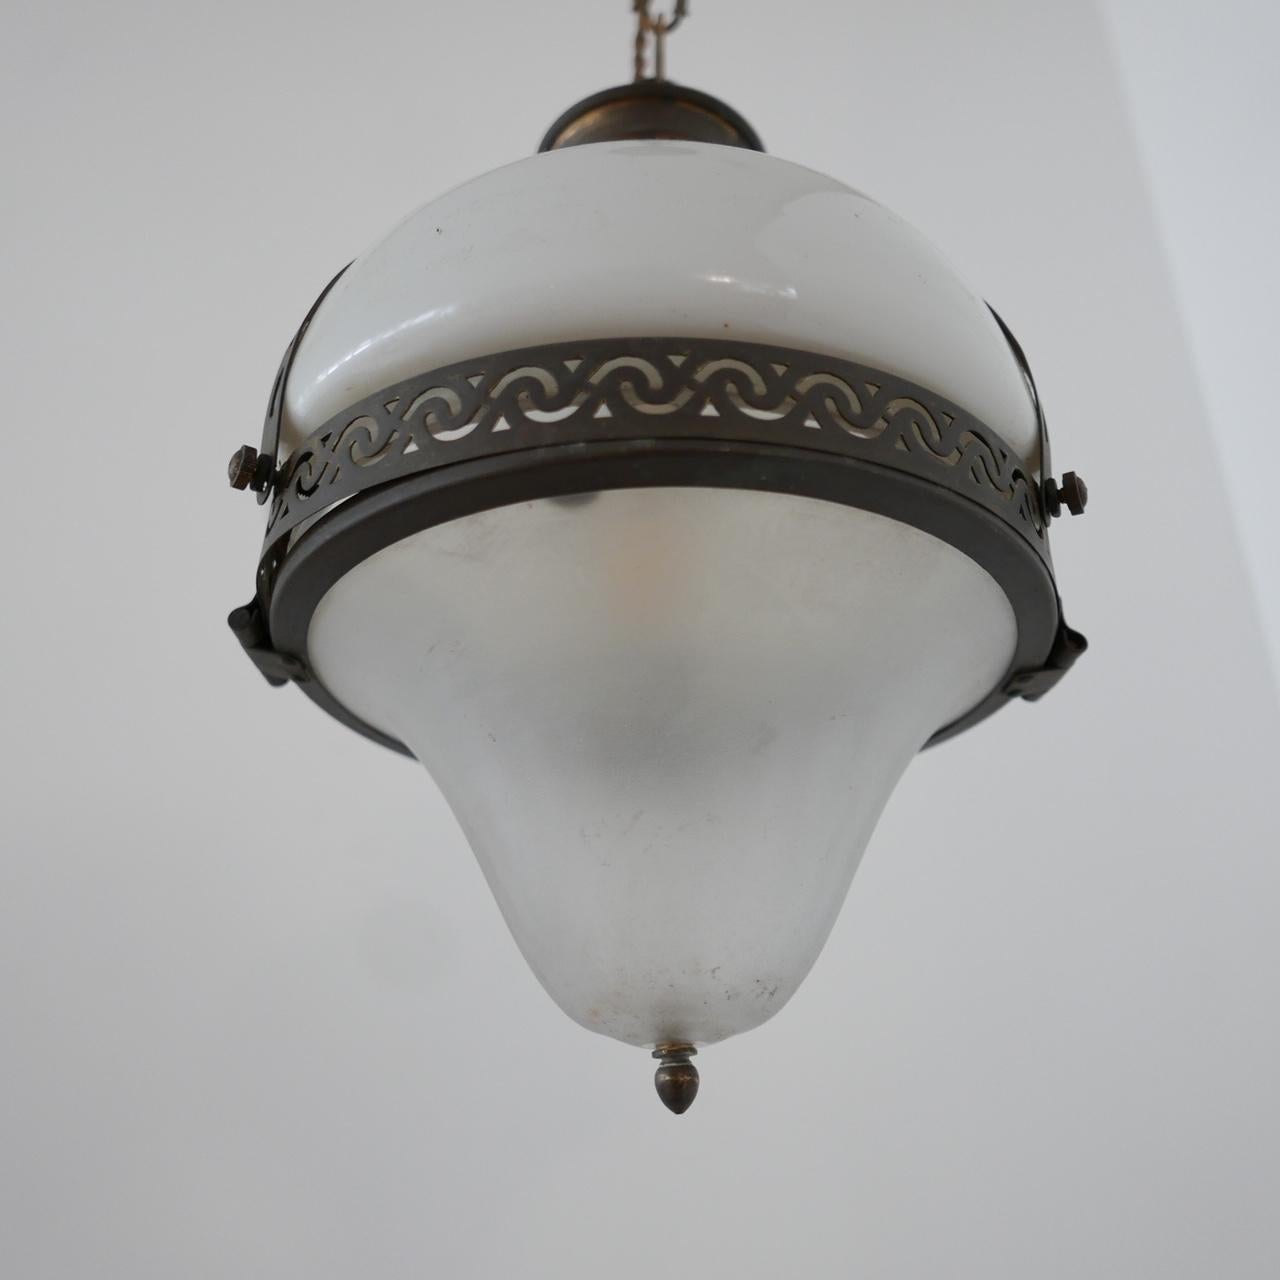 Early 20th century two-tone pendant light.

French, formed from brass rim and gallery.

Opaline top and etched glass base terminating in a brass point at the base. 

Re-wired and PAT tested. With original chain and rose. 

Dimensions: 33